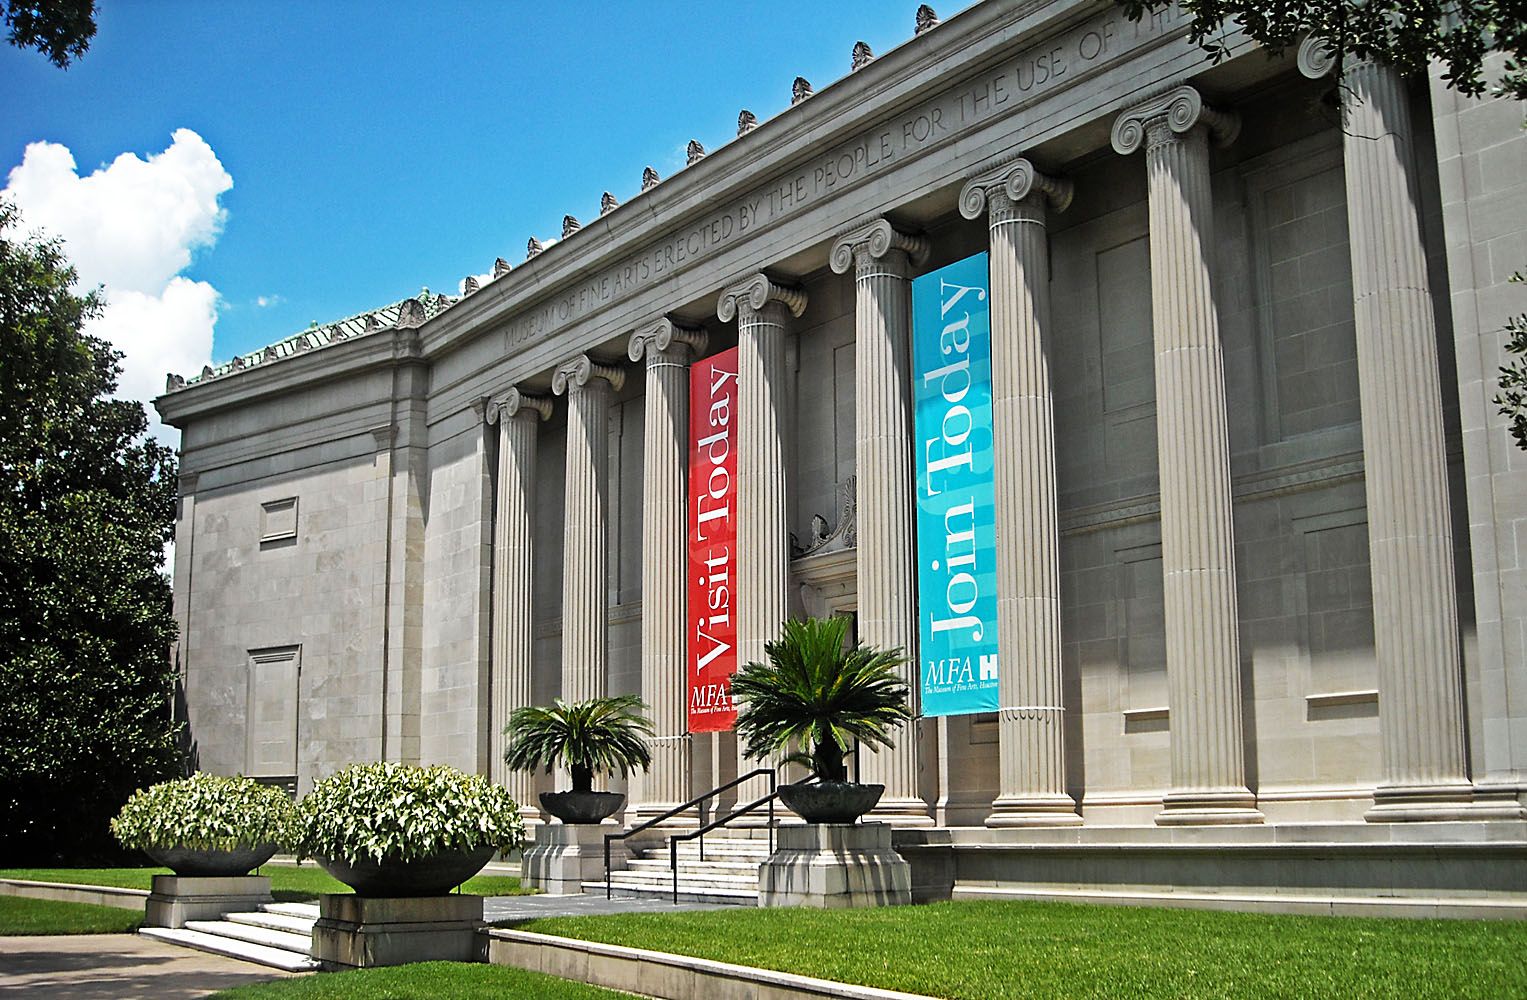 Caroline Wiess Law Building of the Museum of Fine Arts in Houston